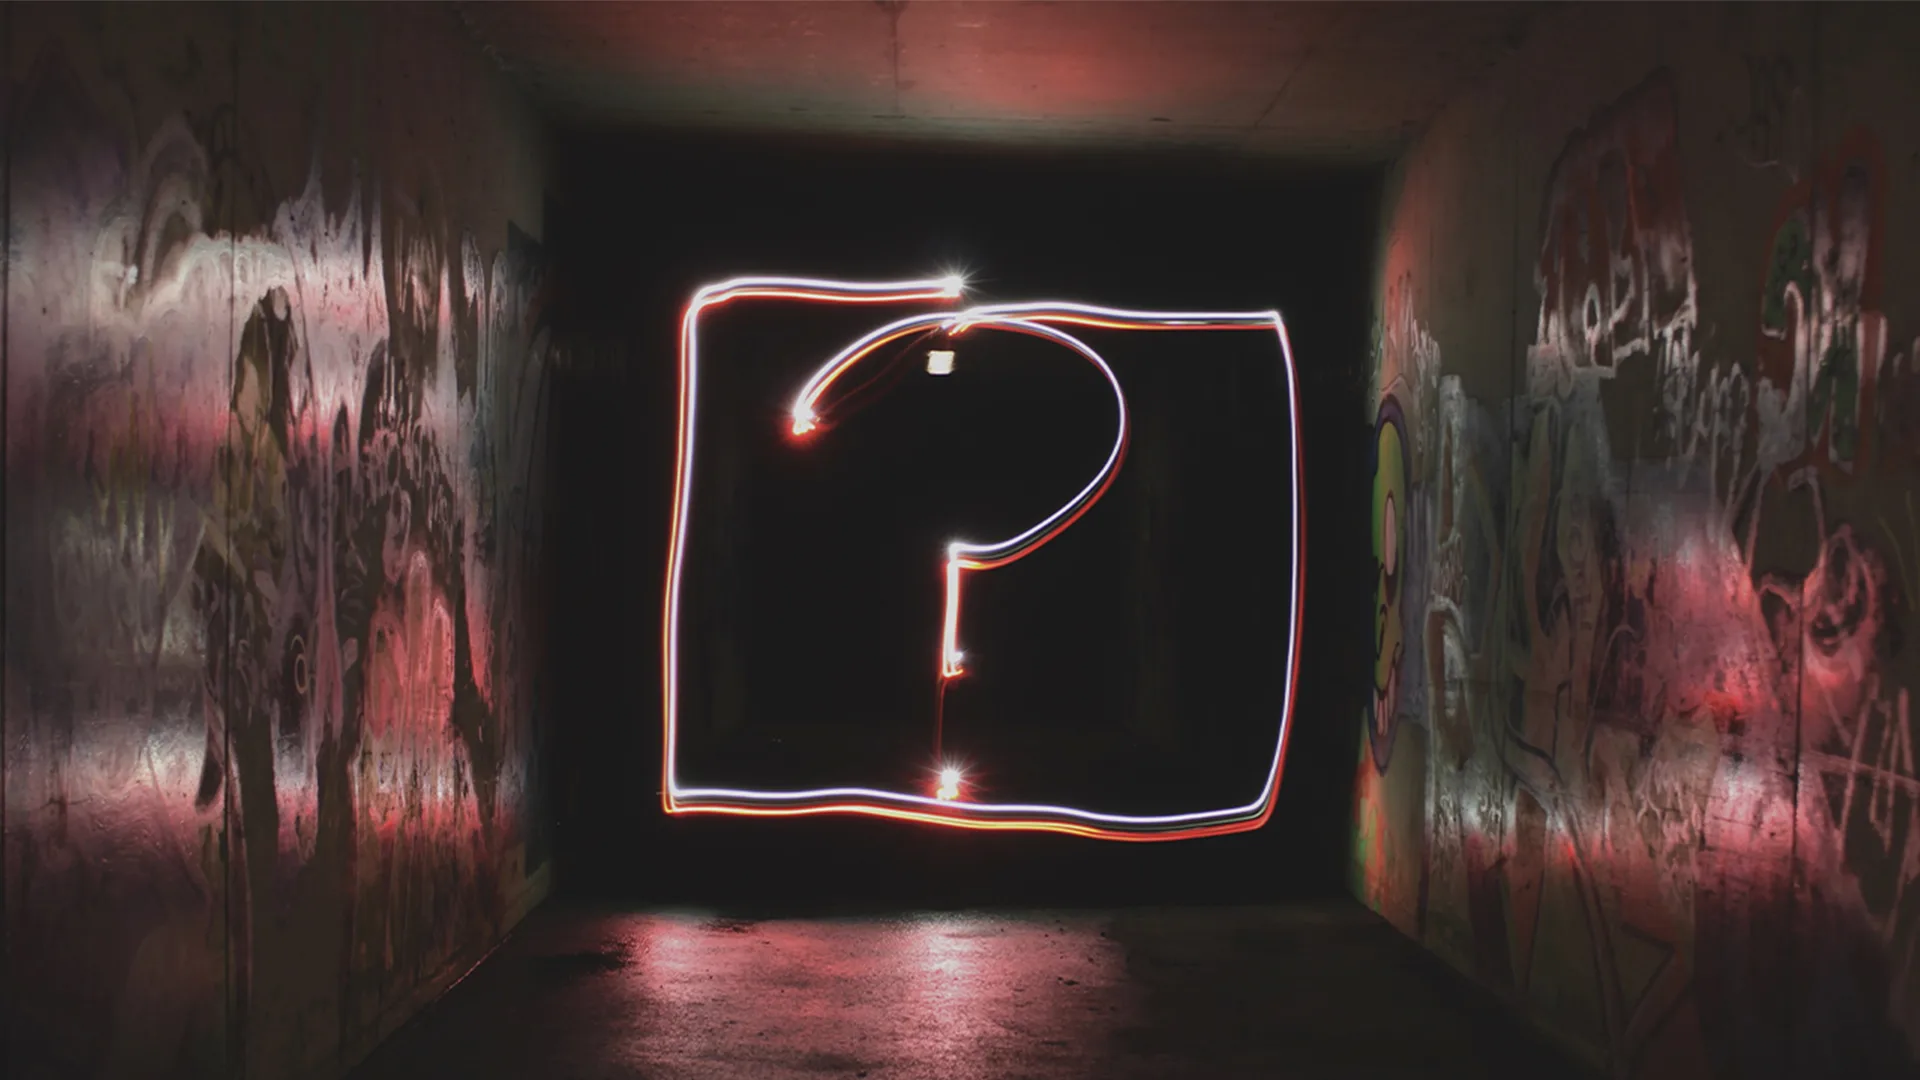 A question mark in neon lights